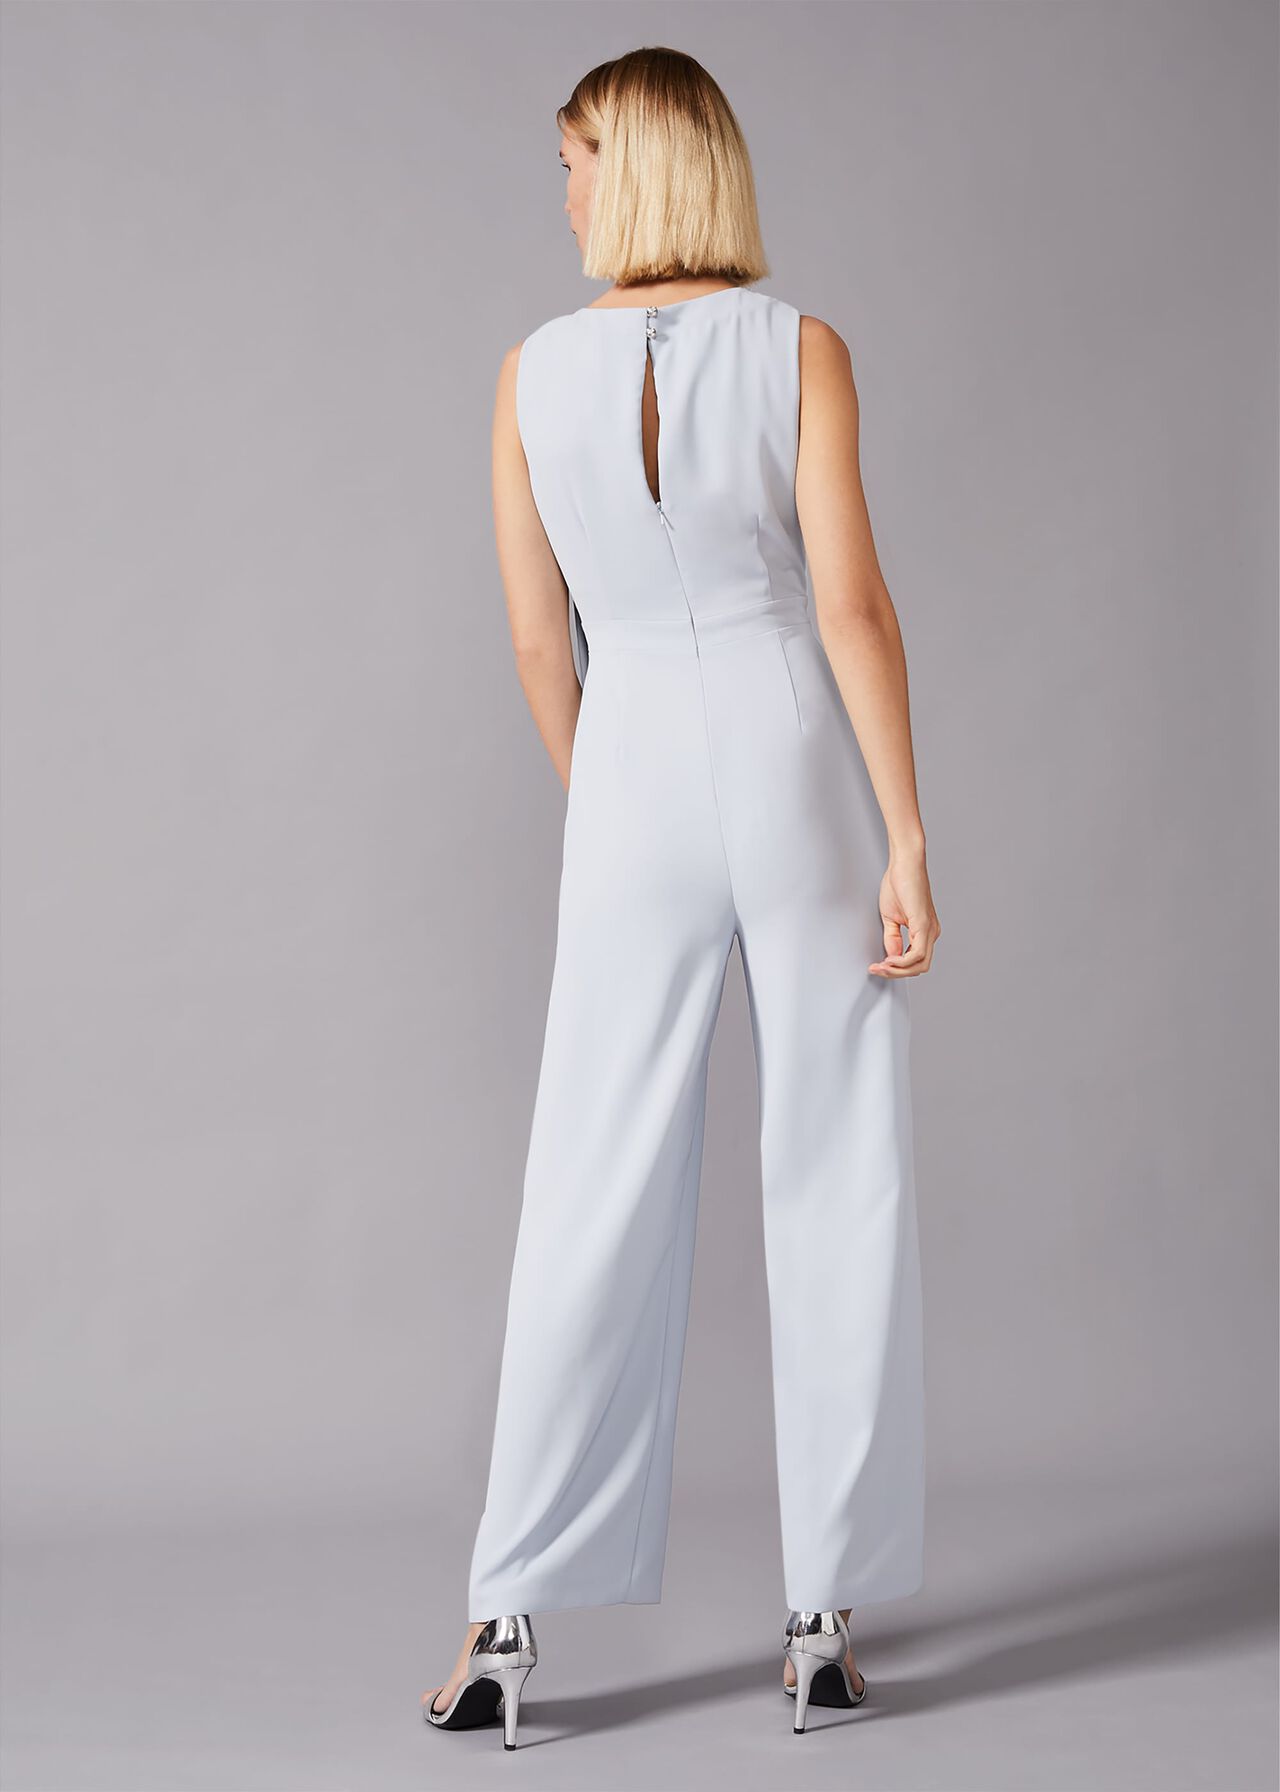 Charity Beaded Neck Jumpsuit